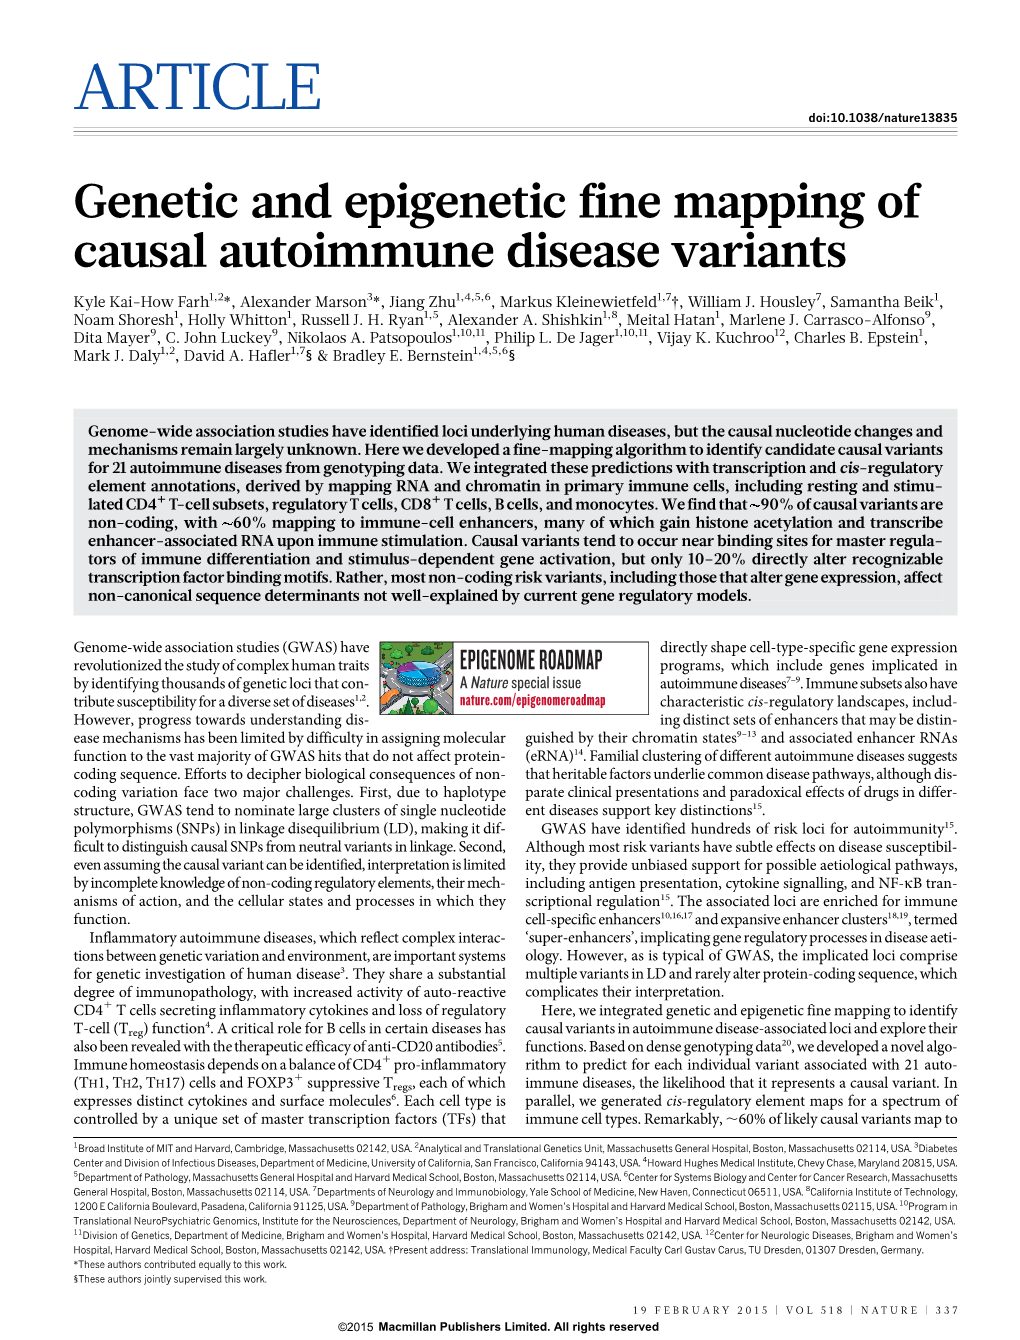 Genetic and Epigenetic Fine Mapping of Causal Autoimmune Disease Variants